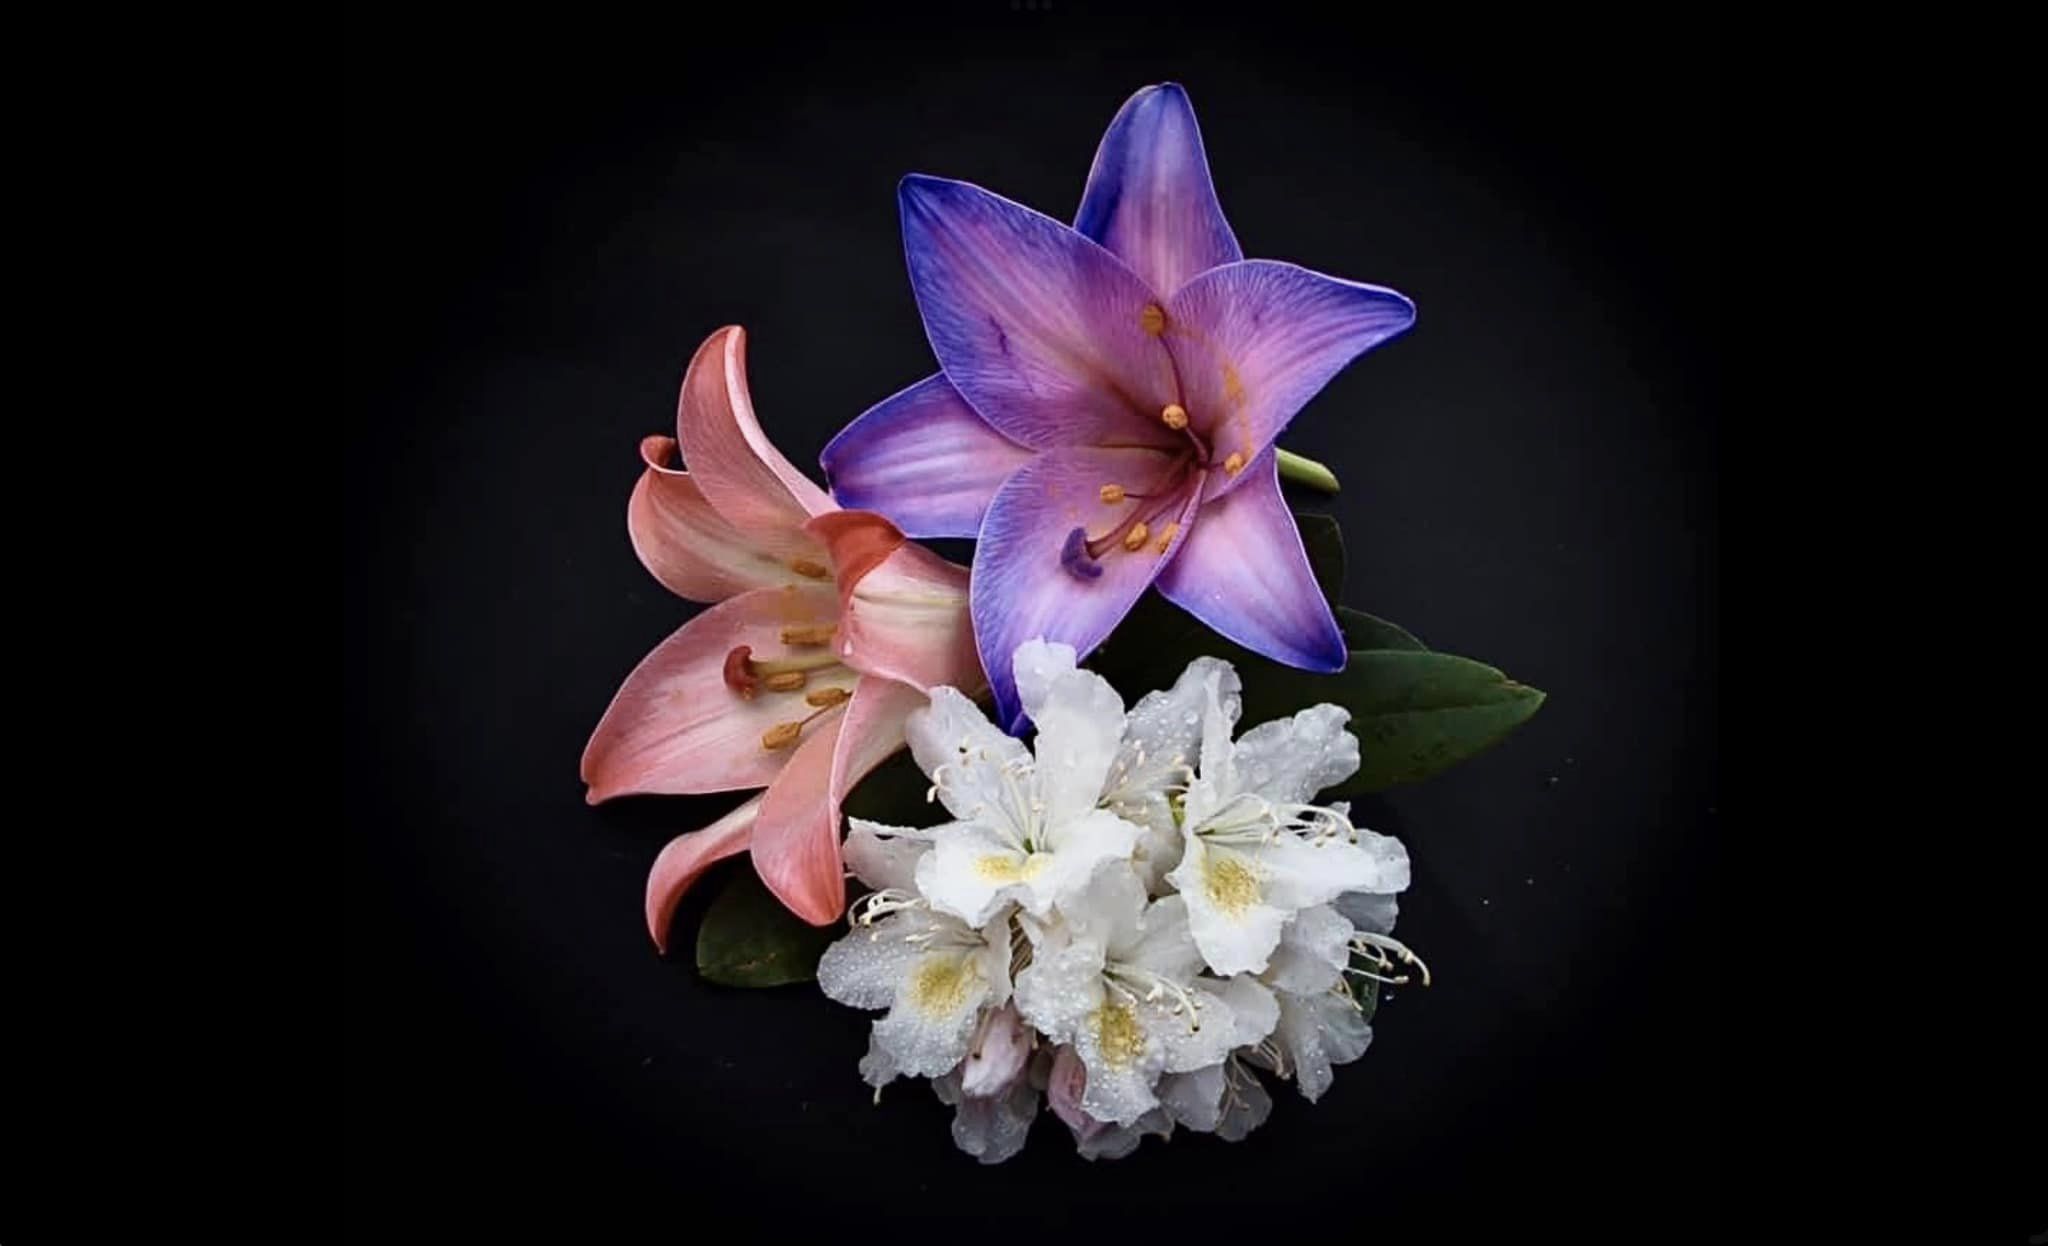 Lilies and rhododendron by Hilary Bradshaw